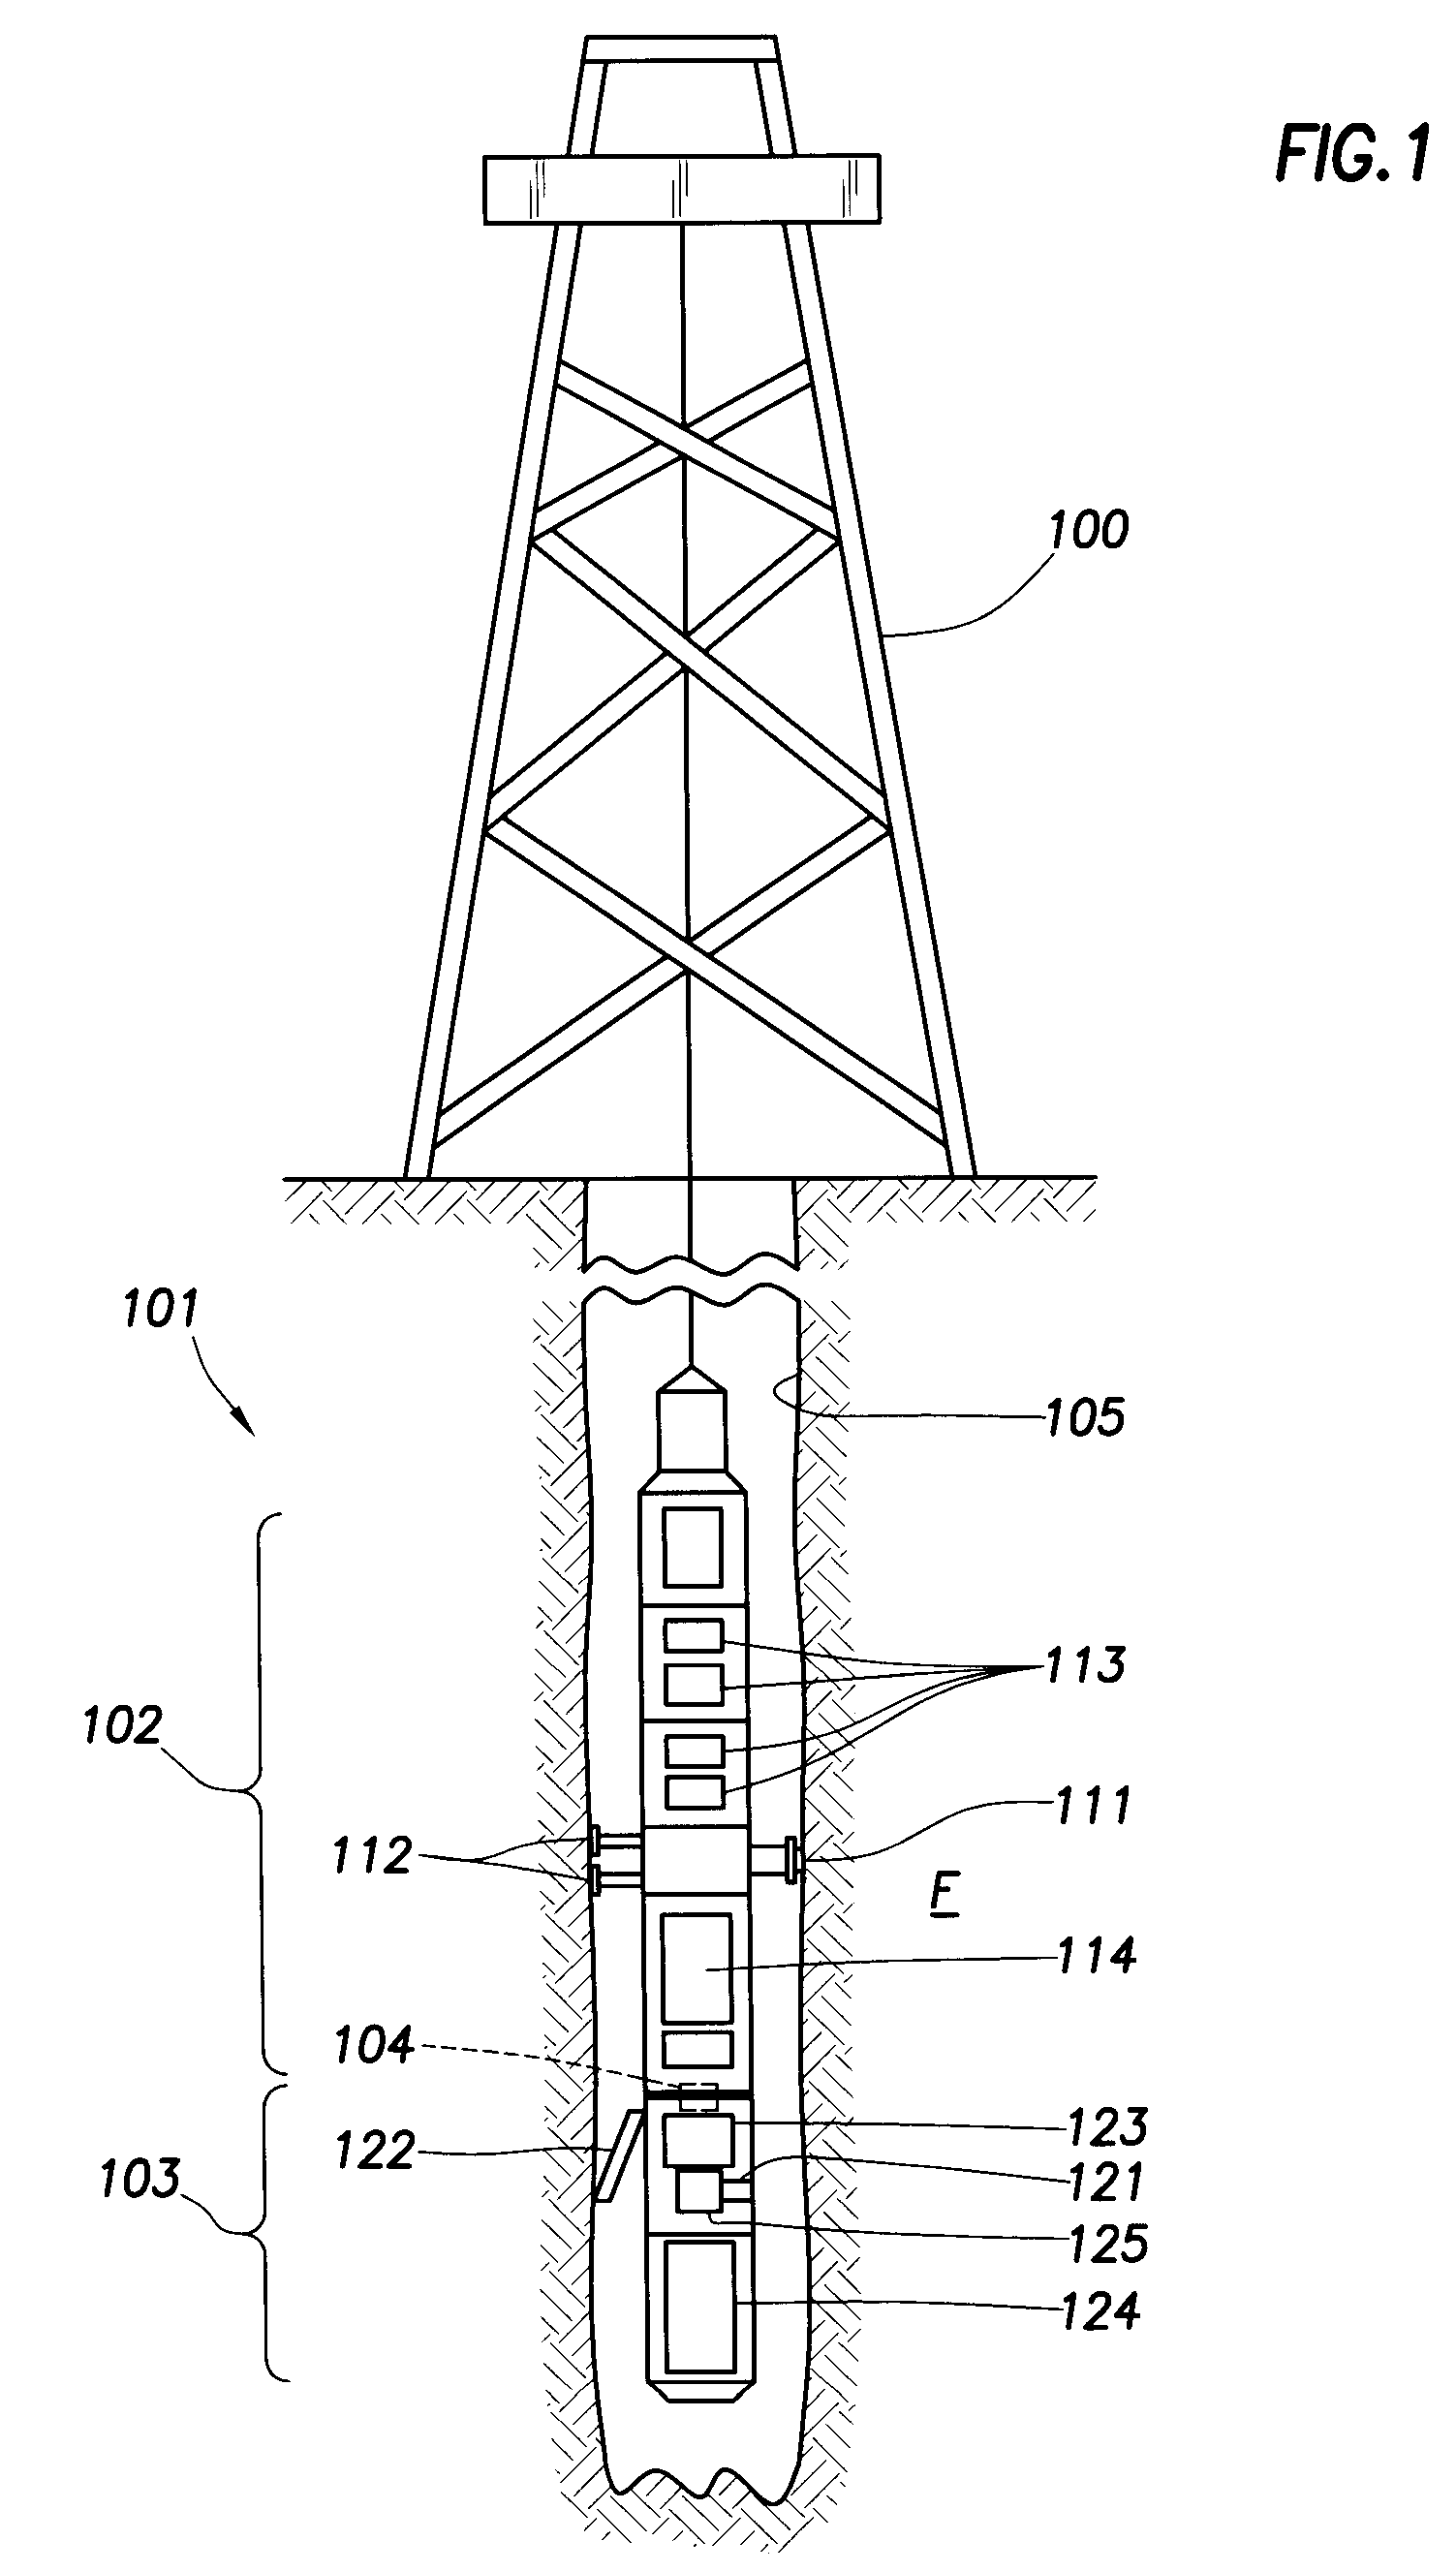 Downhole formation testing tool